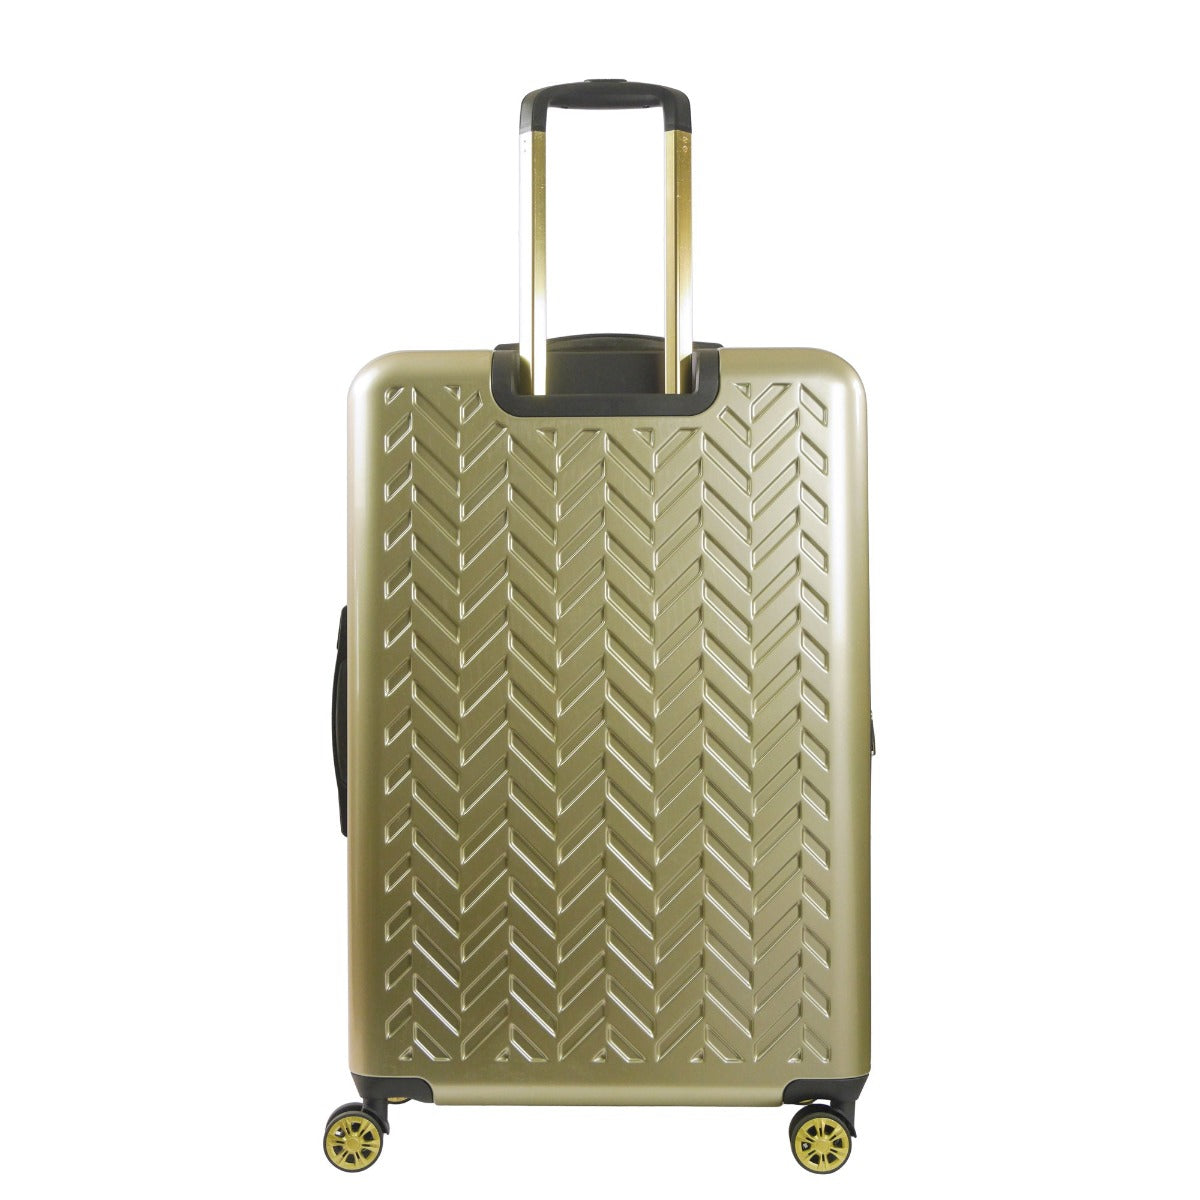 Ful Groove 31" hardside spinner suitcase gold checked luggage black details